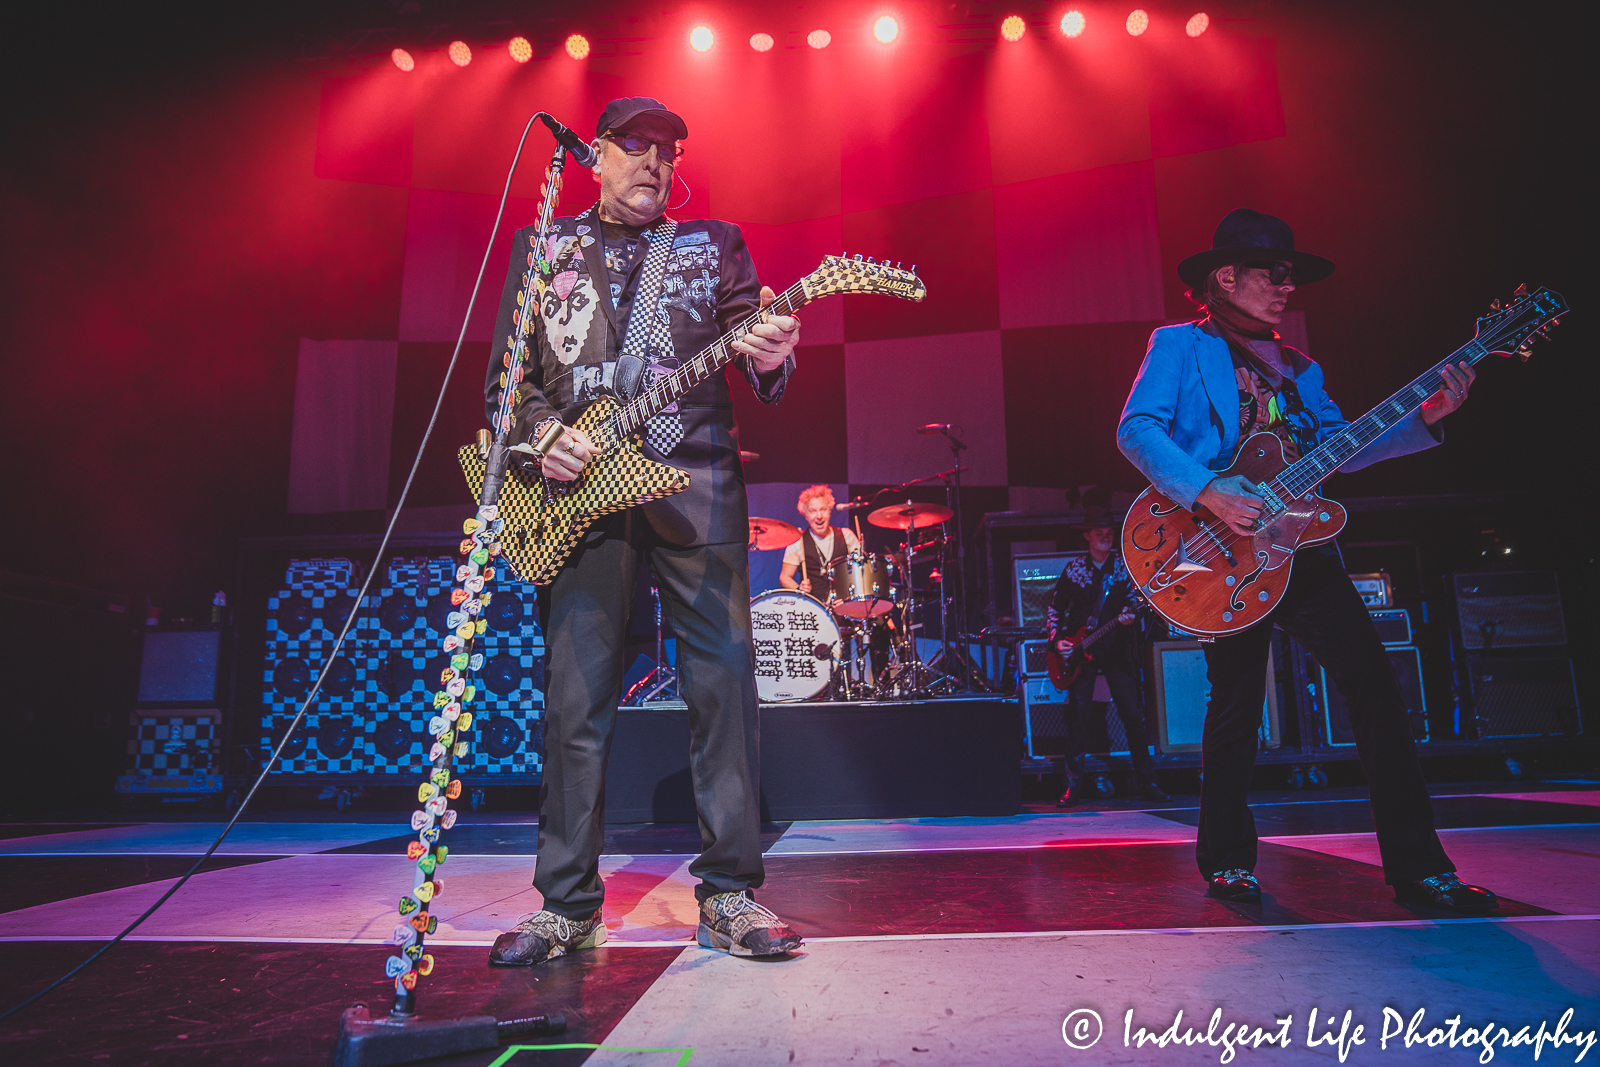 Cheap Trick original members Rick Nielsen and Tom Petersson live in concert with Daxx Nielsen and Robin Taylor Zander at Uptown Theater in Kansas City, MO on September 13, 2022.